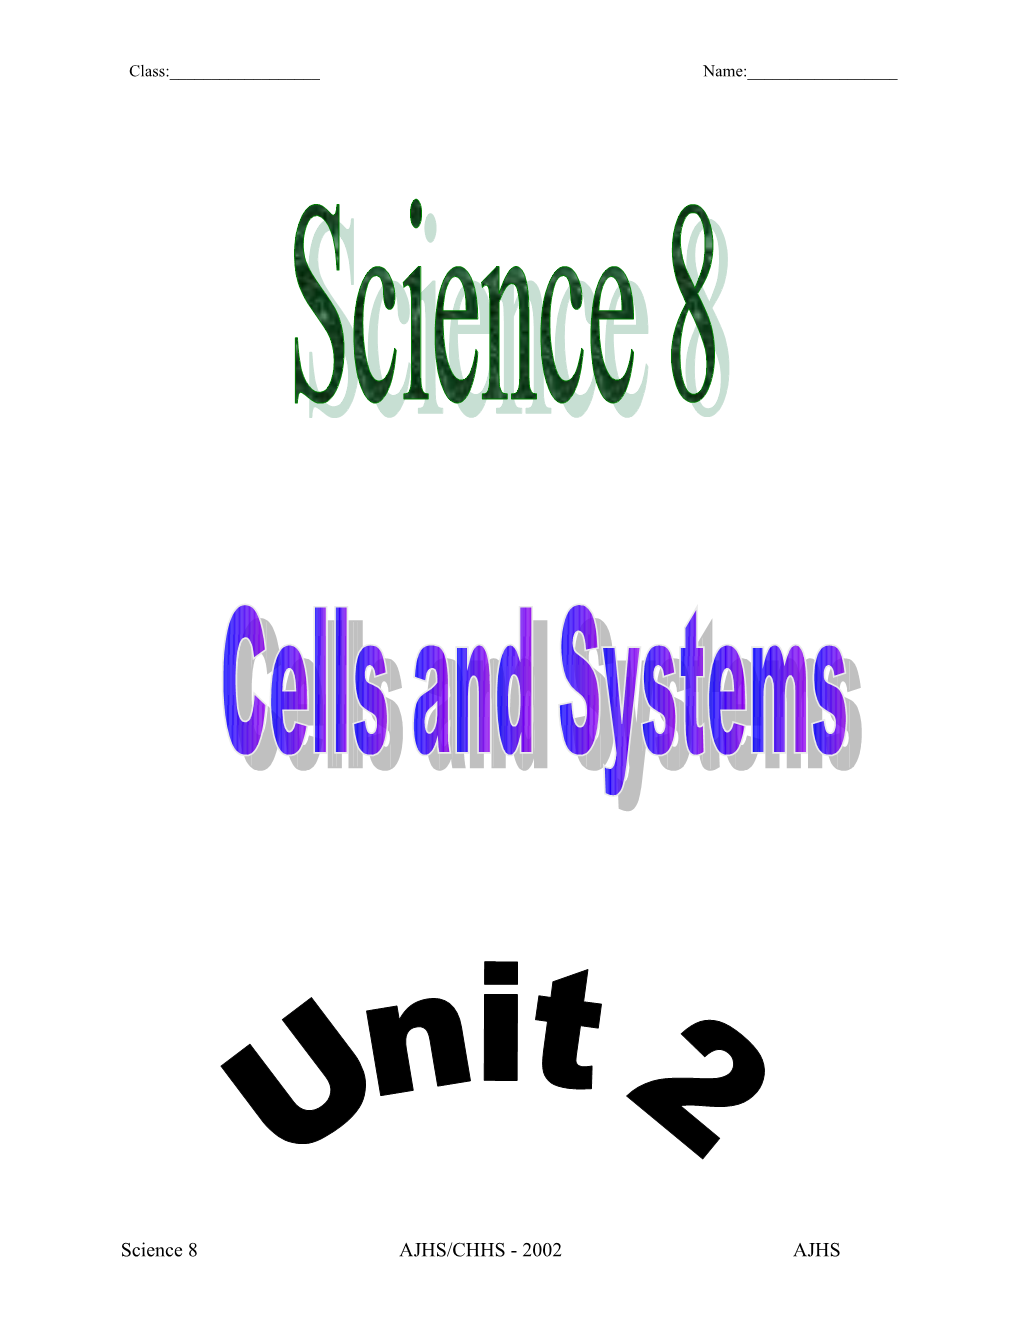 Unit 2 Cells and Systems